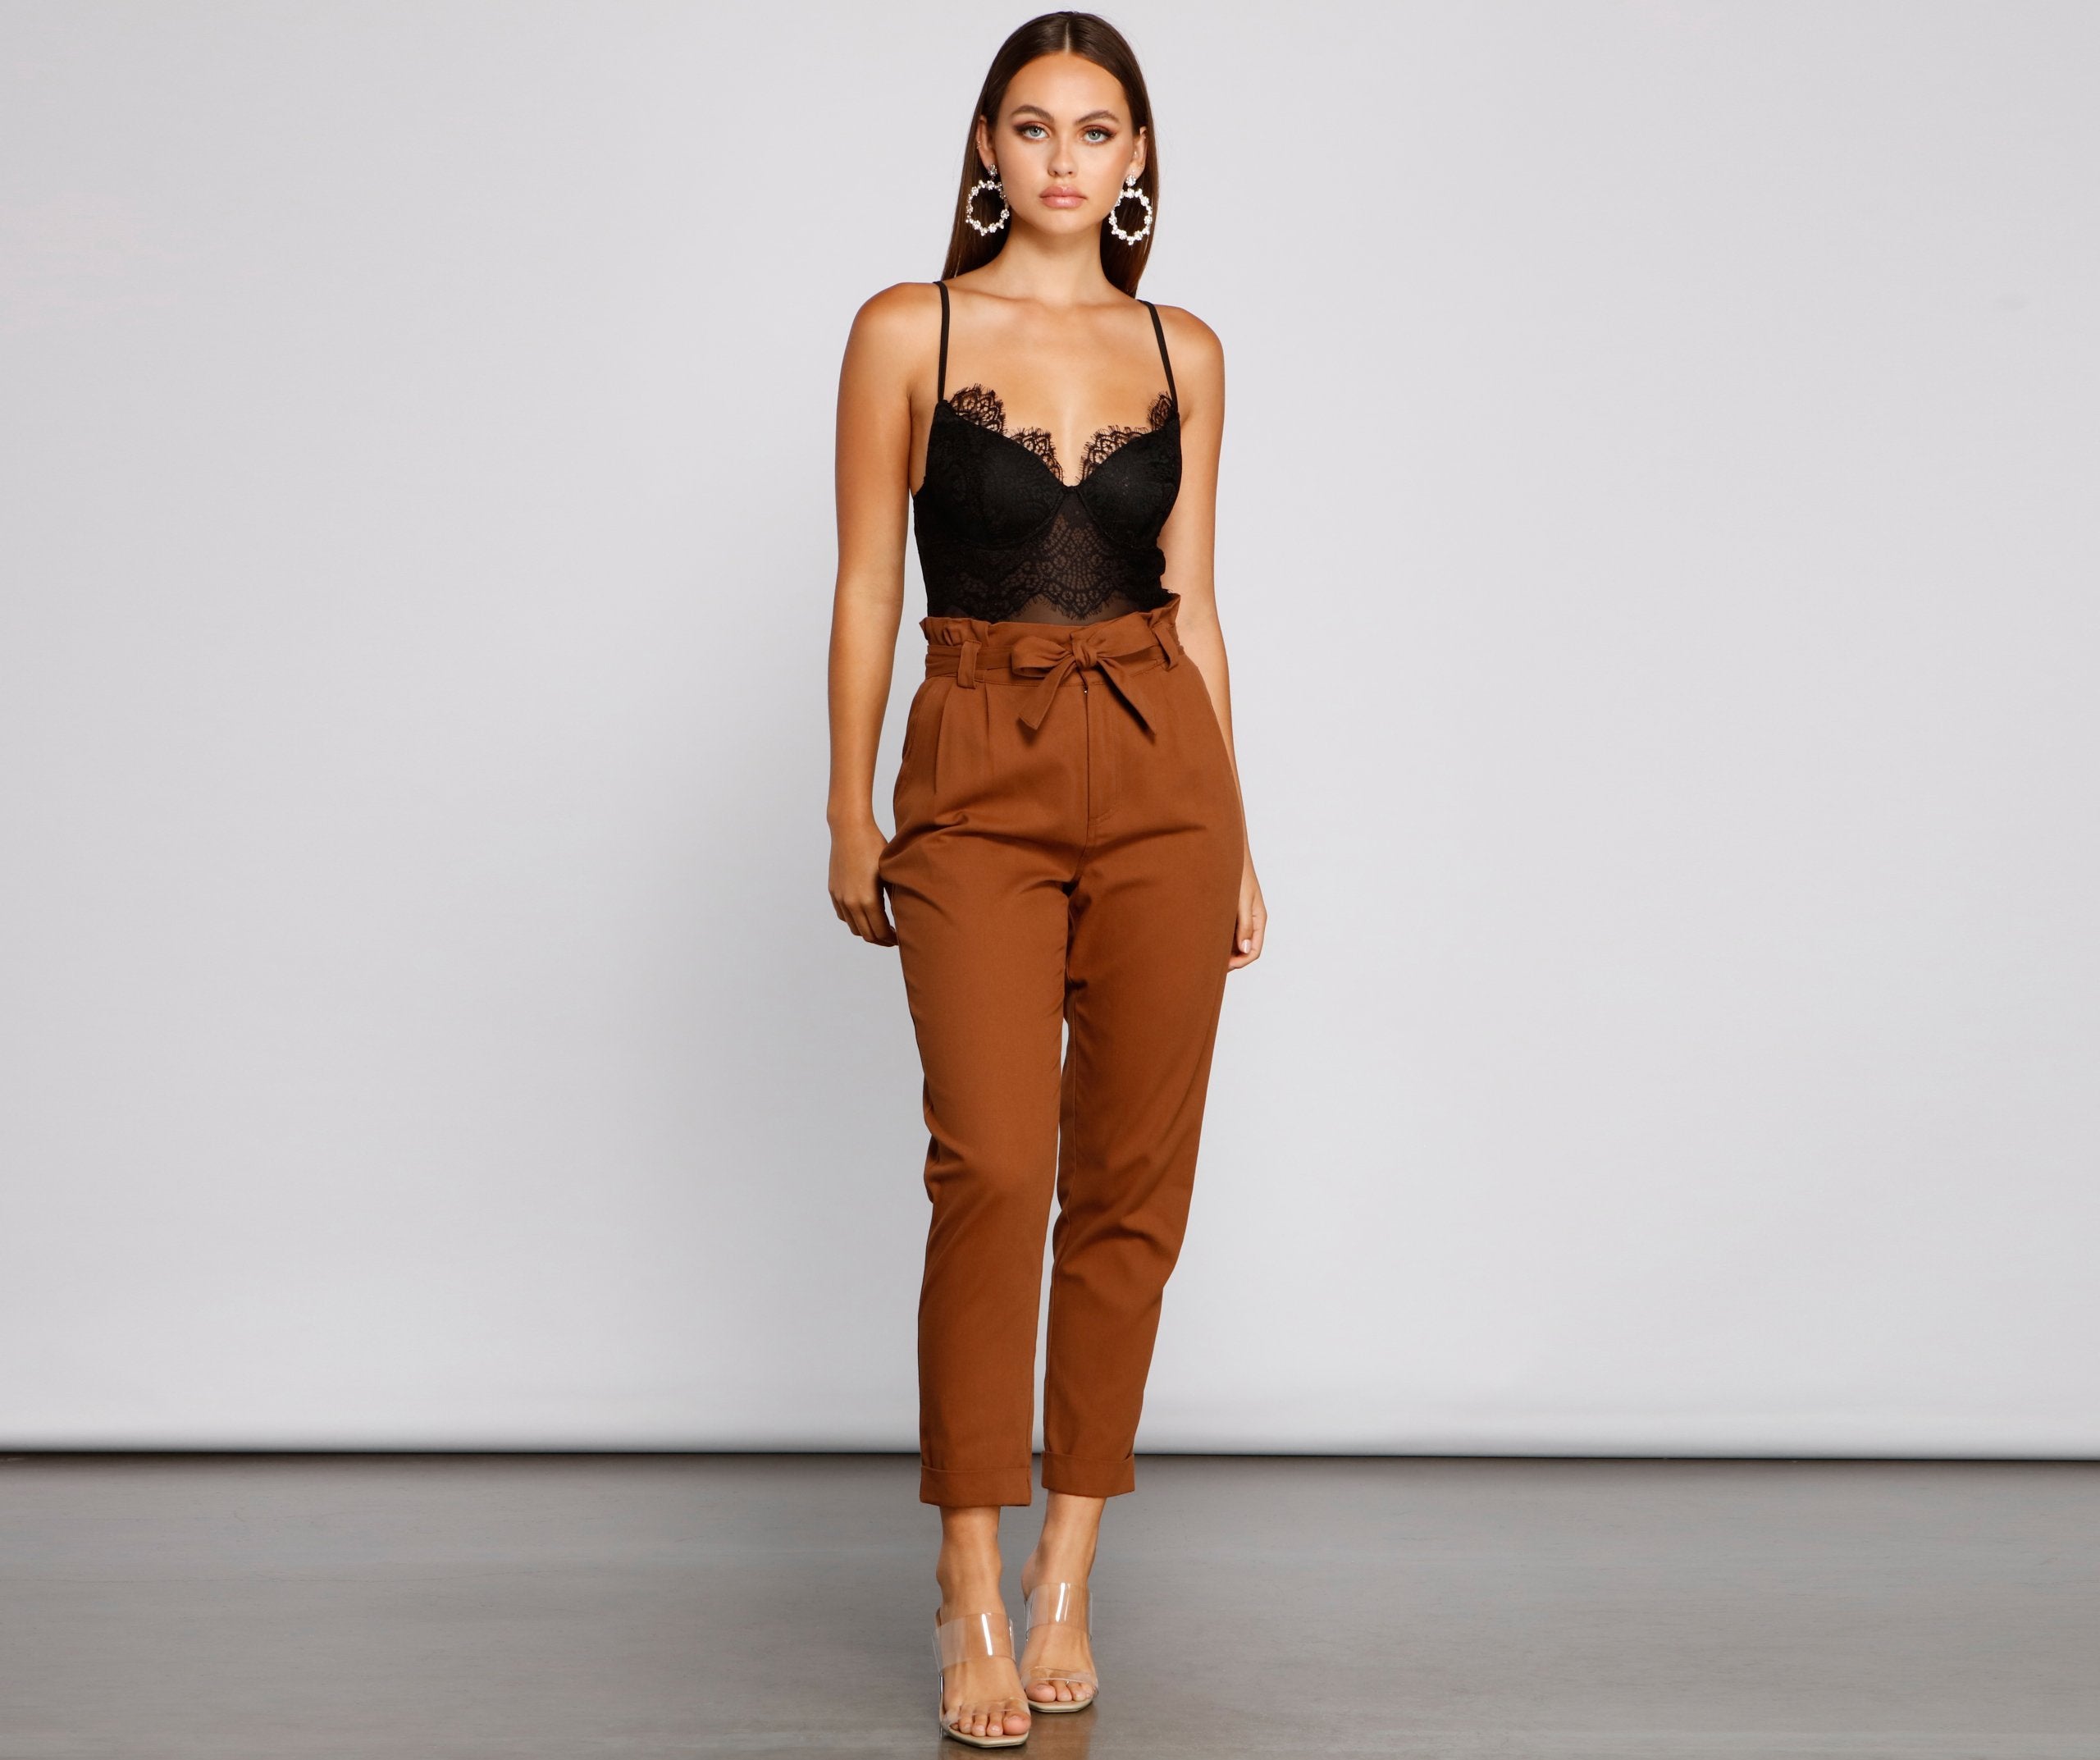 Trendy And Tapered High Waist Paperbag Pants